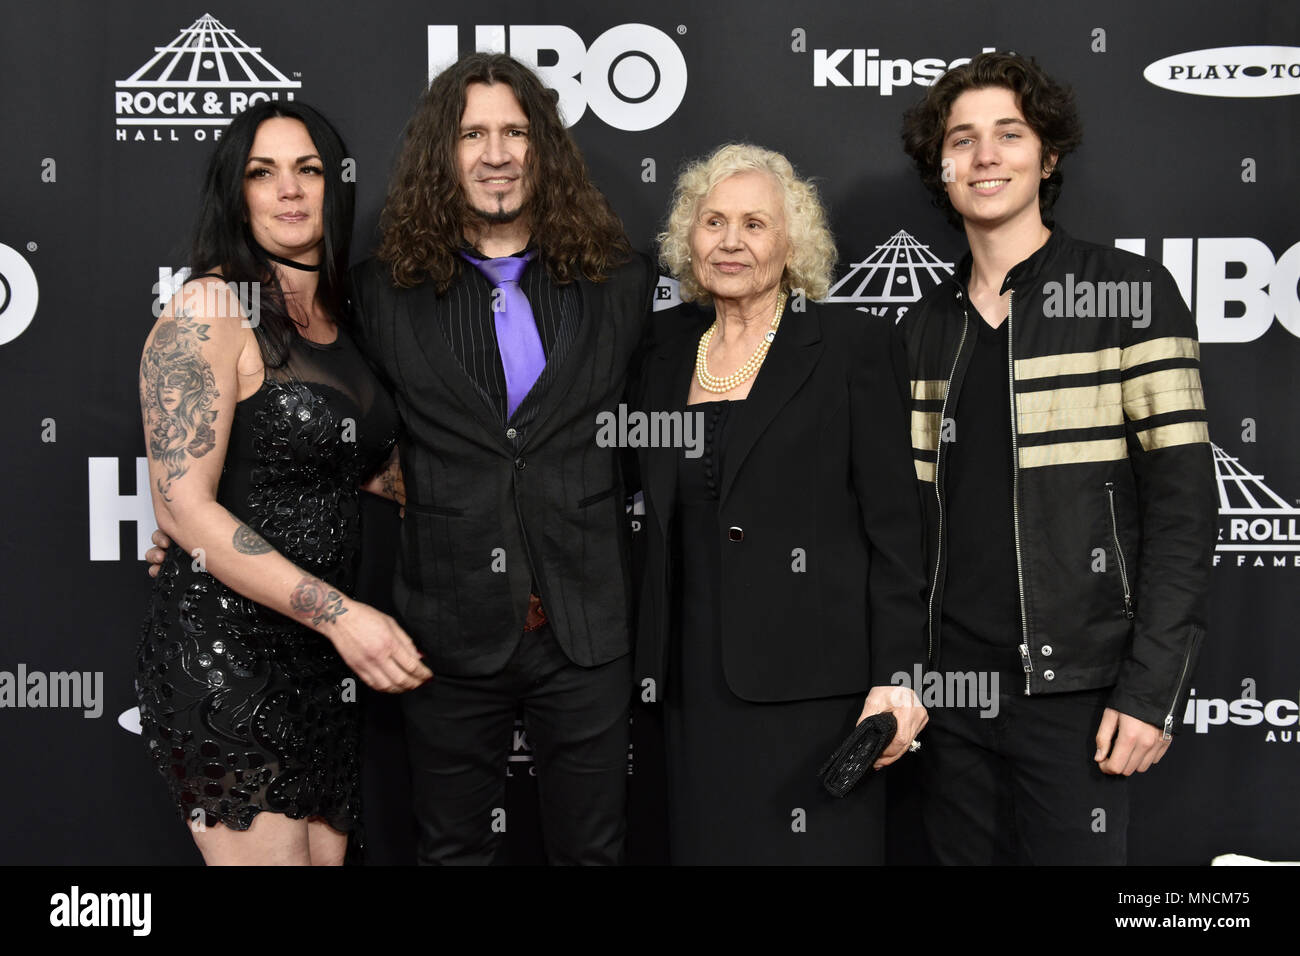 33rd Annual Rock & Roll Hall of Fame Induction Ceremony at Public Auditorium in Cleveland, Ohio.  Featuring: Phil X Where: Cleveland, Ohio, United States When: 14 Apr 2018 Credit: Ray Garbo/WENN.com Stock Photo